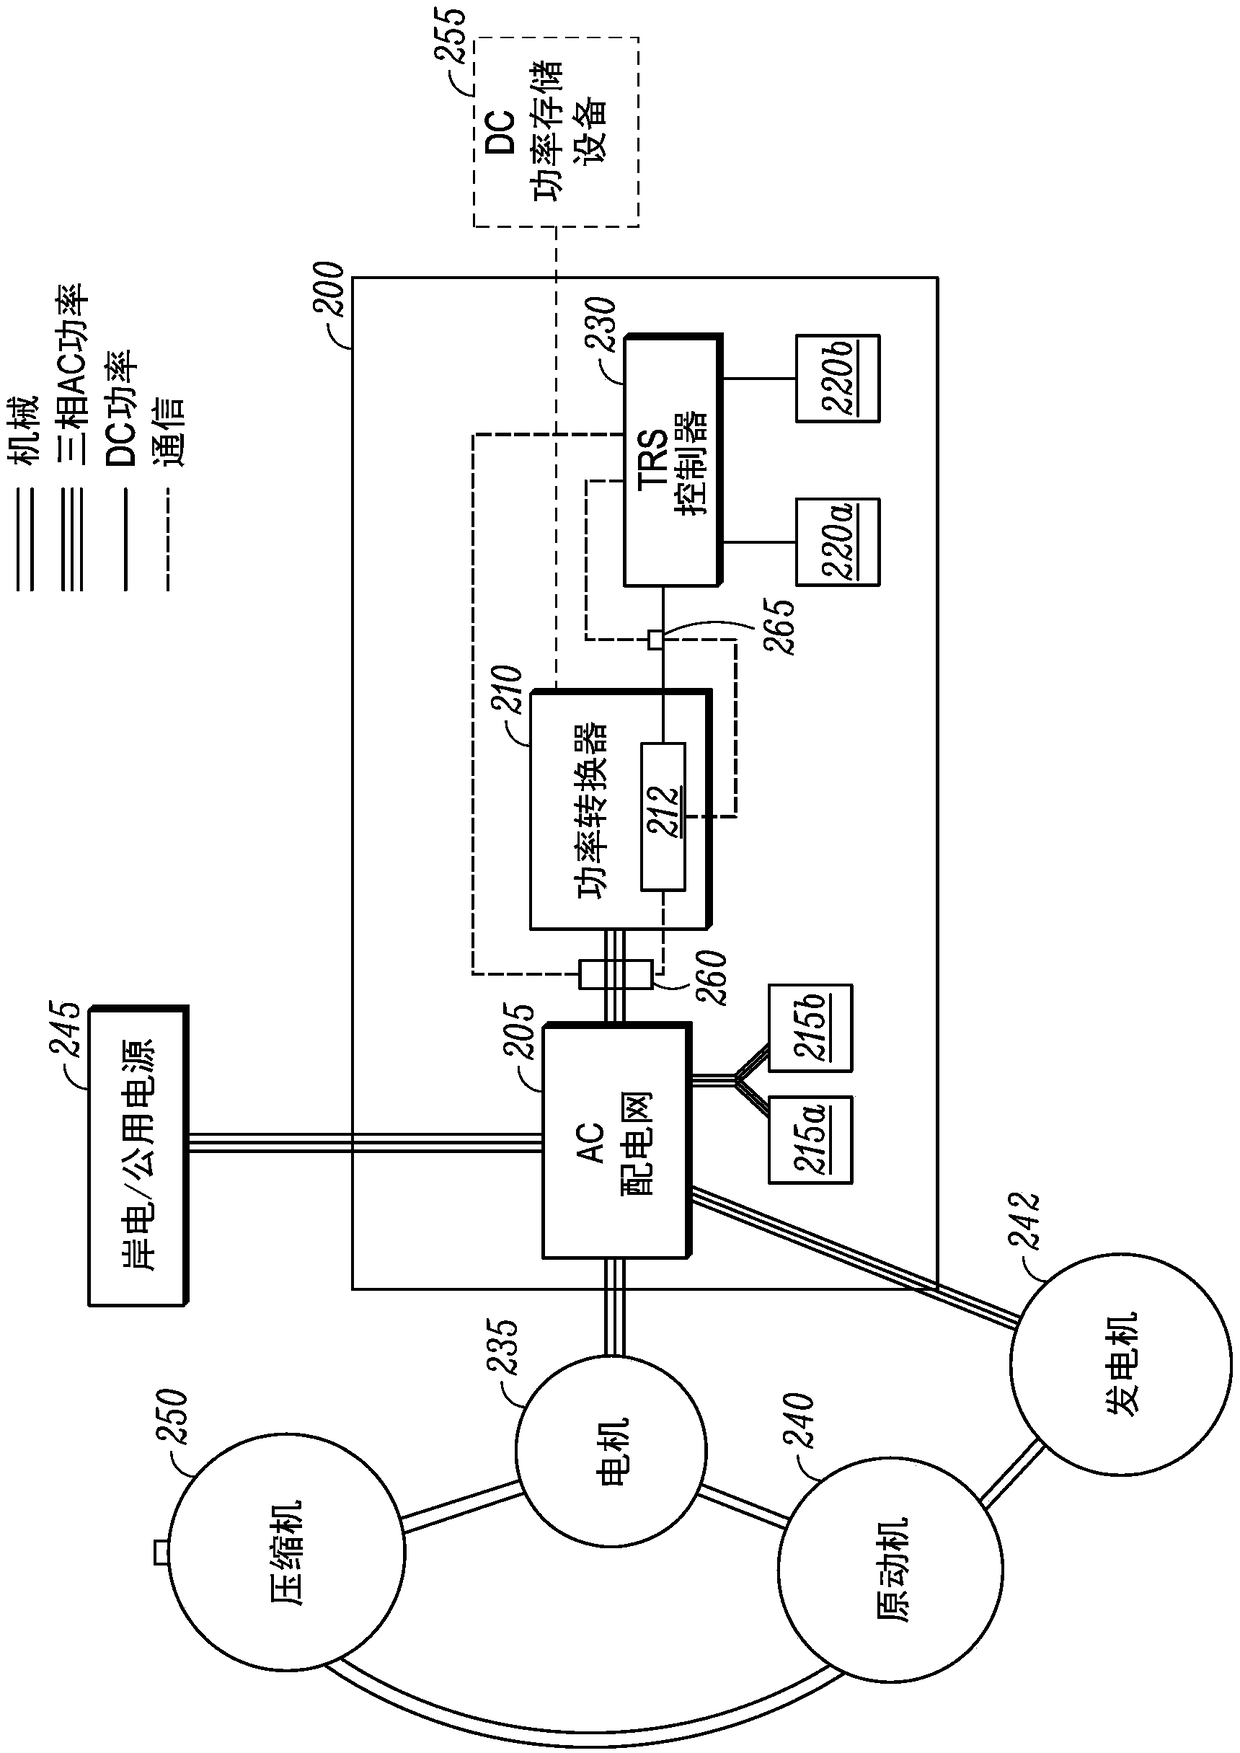 Method and system for power management using a power converter in transport